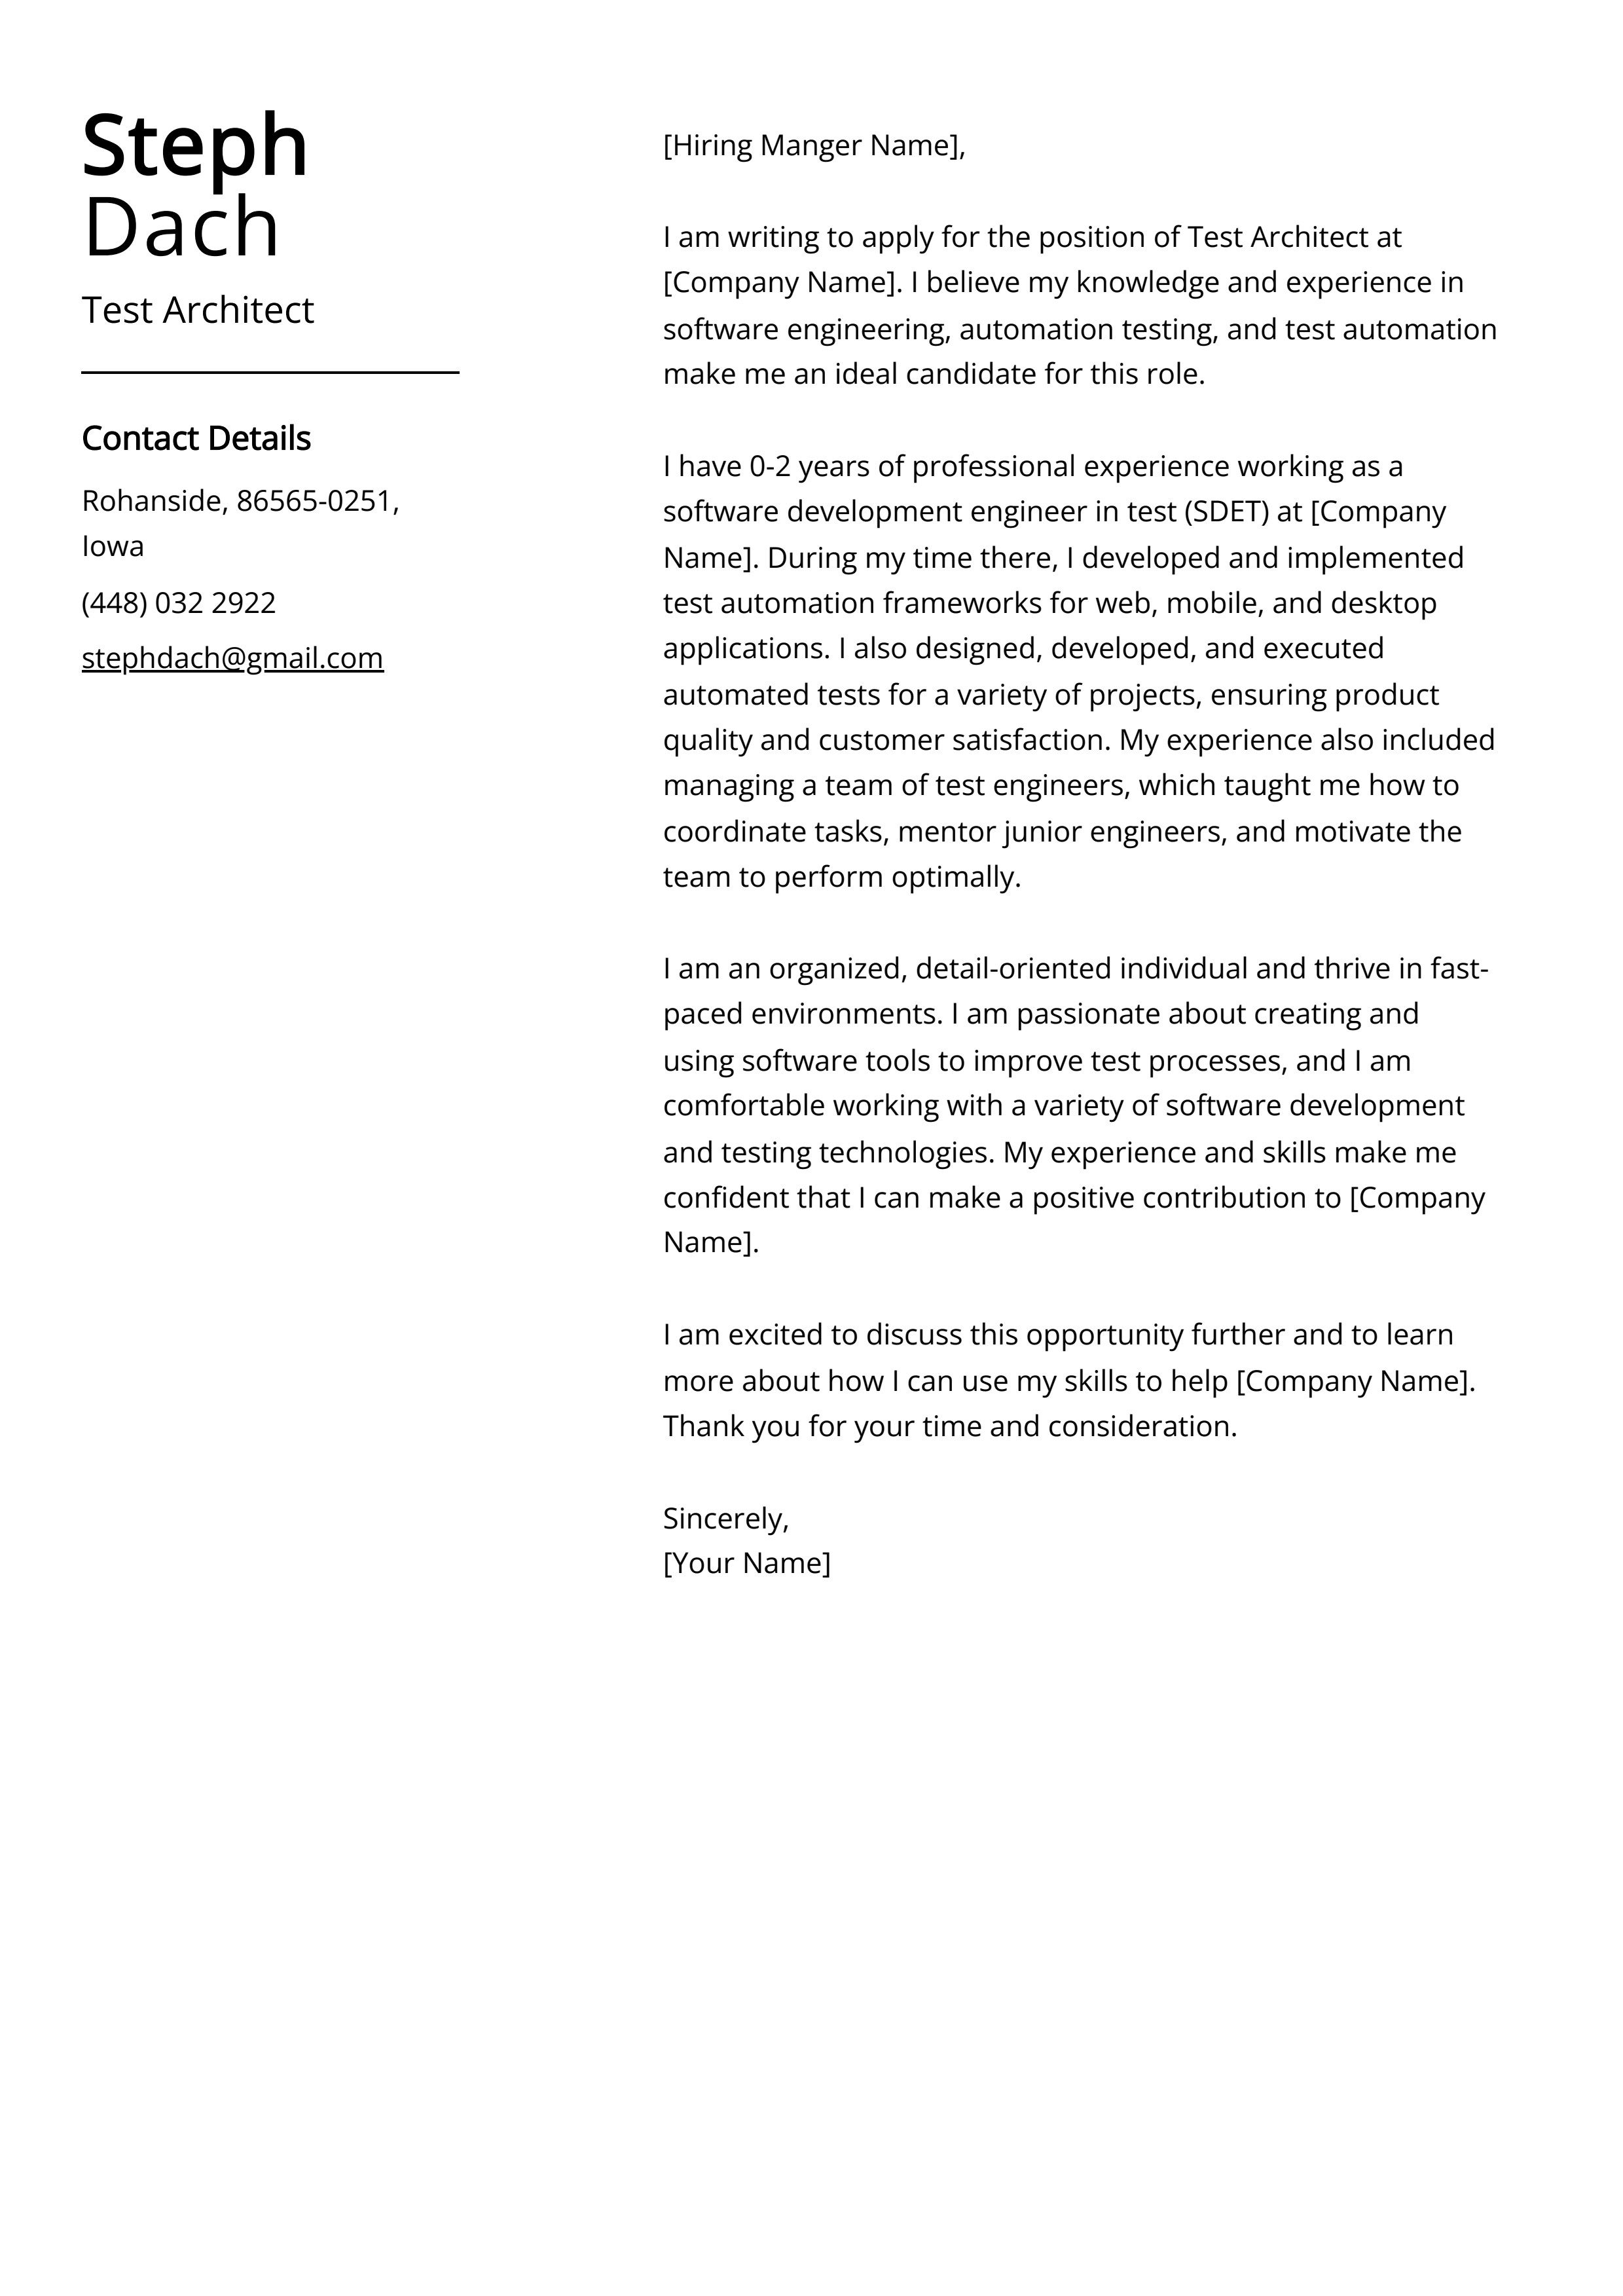 Test Architect Cover Letter Example